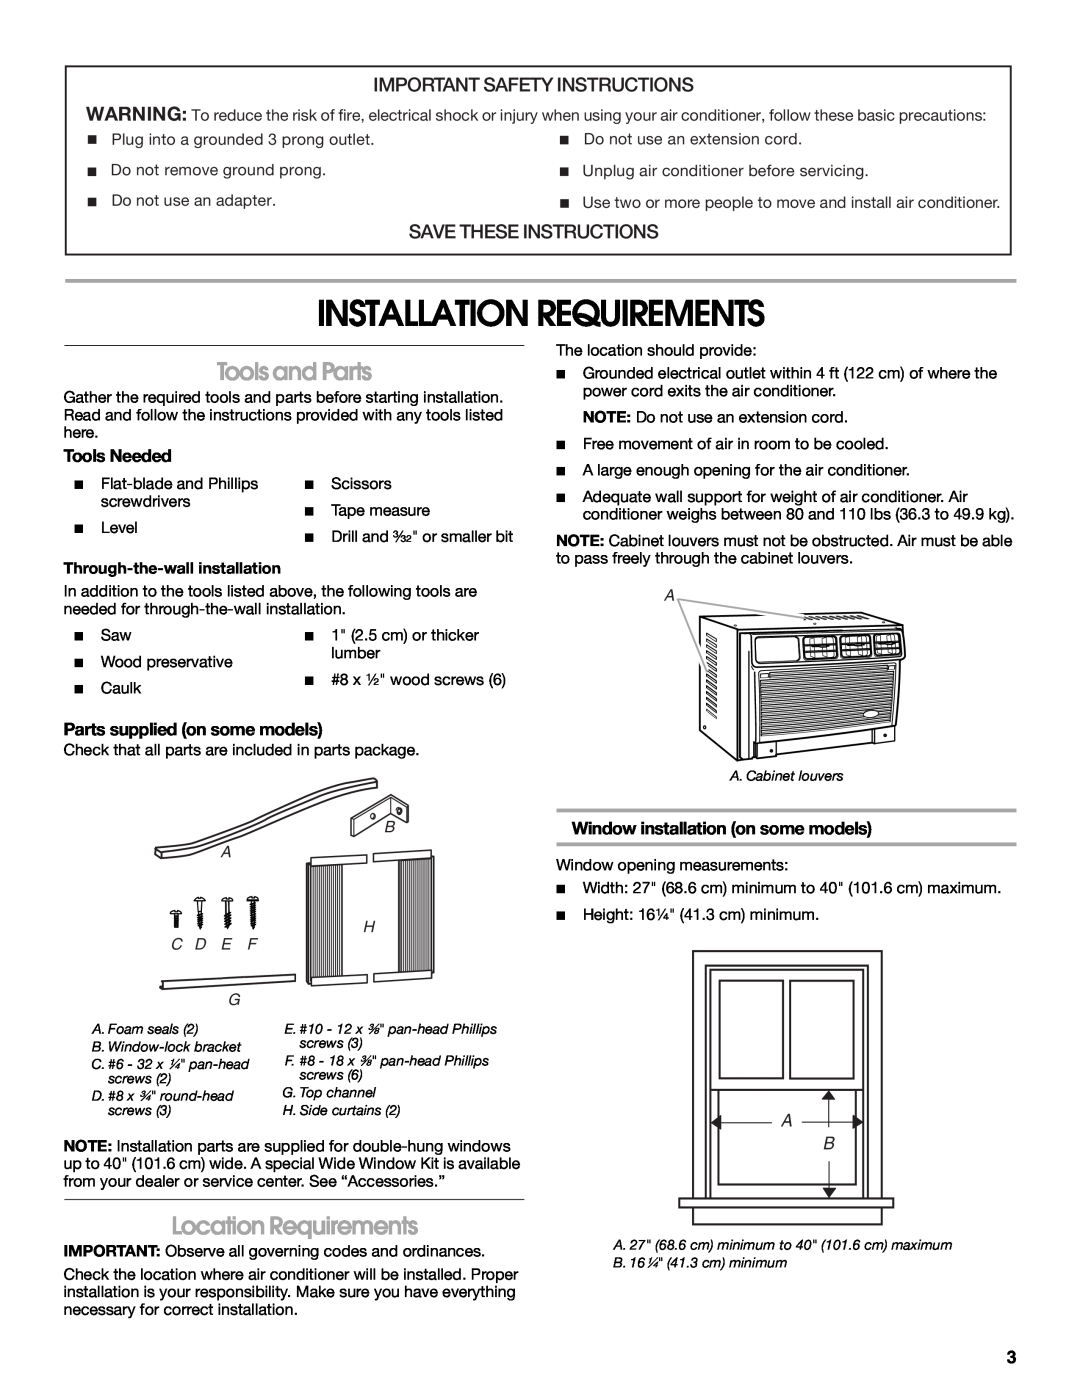 Whirlpool ACC082XR0 manual Installation Requirements, Tools and Parts, Location Requirements, Important Safety Instructions 